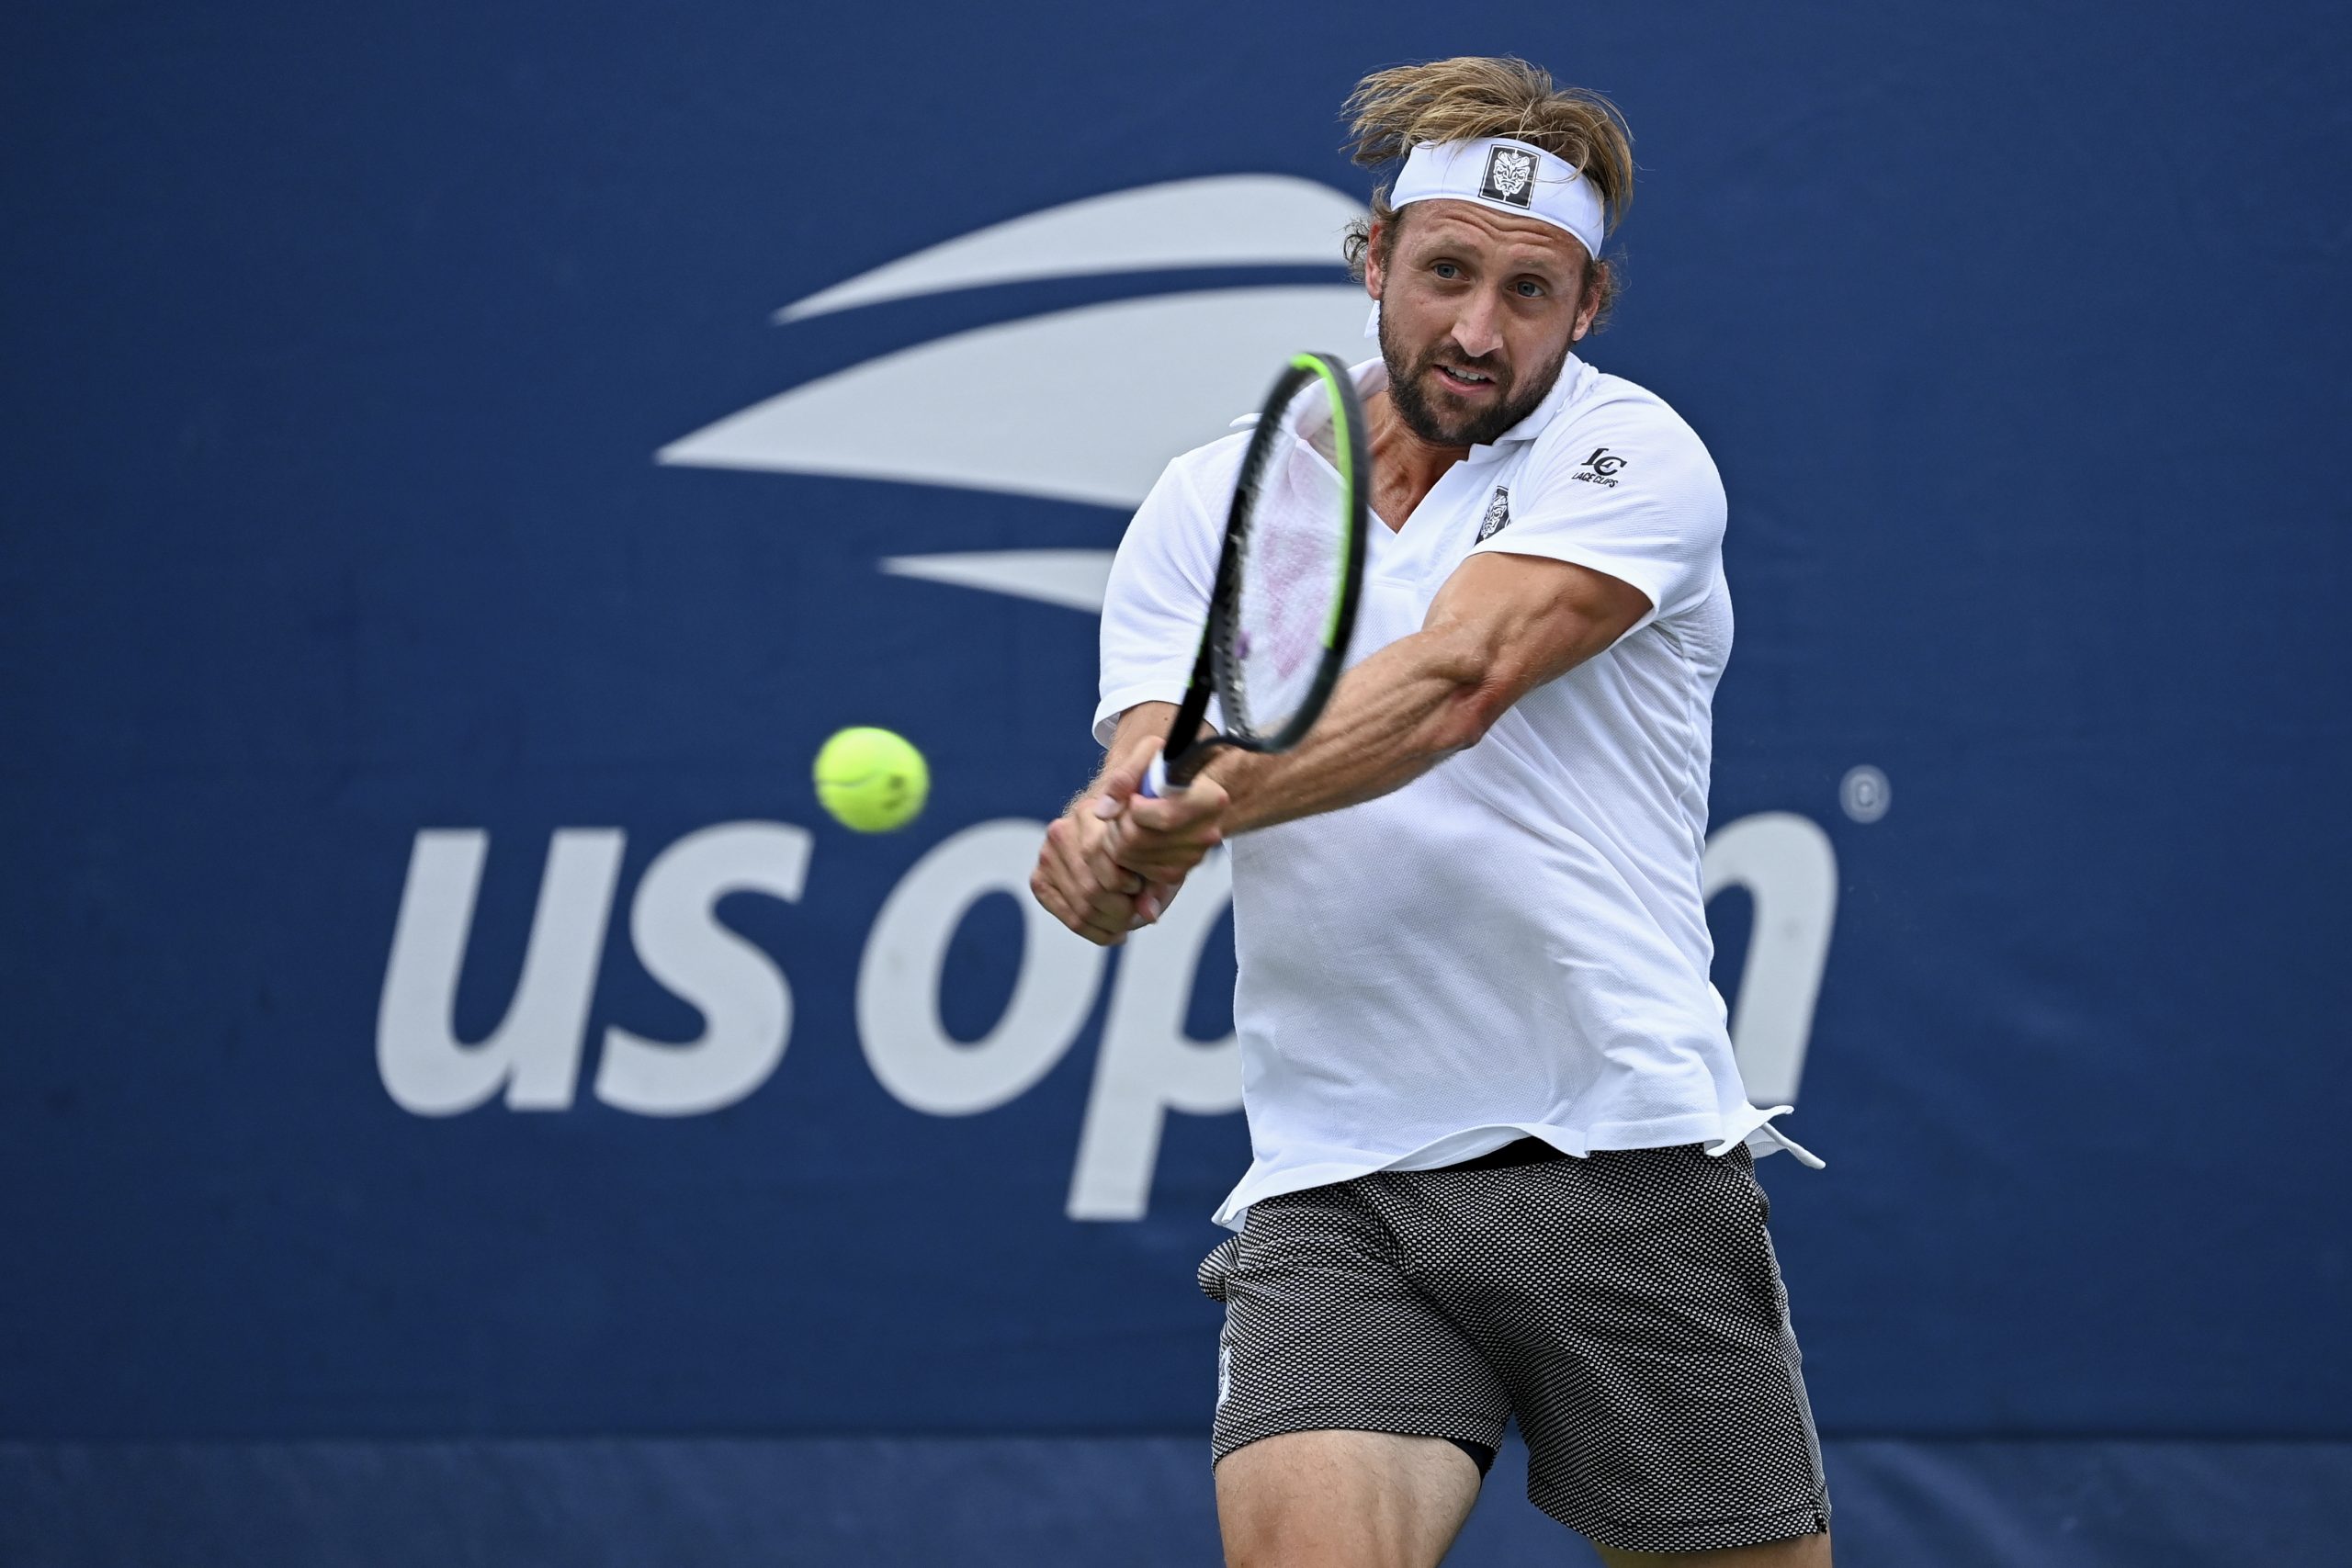 Tennys Sandgren in action during a Men's Singles match at the 2021 US Open, Tuesday, Aug. 31, 2021 in Flushing, NY. (Andrew Ong/USTA via AP)